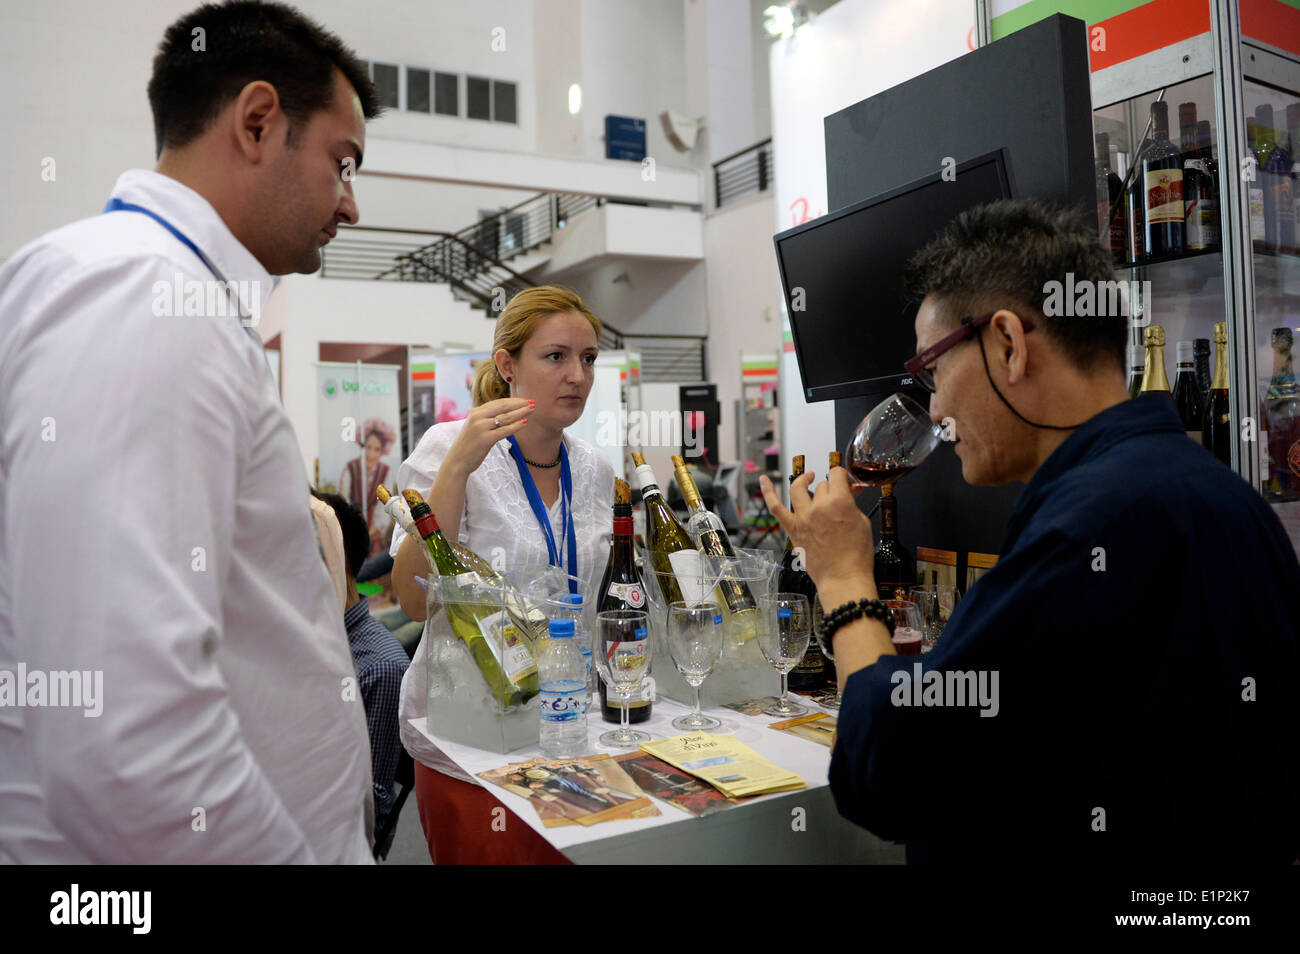 Ningbo, China's Zhejiang Province. 8th June, 2014. A visitor savours Bulgarian wine at the 2014 Central and Eastern European Countries' Products Fair (CEEC Fair) in Ningbo, east China's Zhejiang Province, June 8, 2014. Opening Sunday in Ningbo, the 2014 CEEC Fair attracted 180 exhibitors from 16 Central and Eastern European countries. The fair is part of the 2014 China Ningbo-CEEC Economic and Cultural Exchange Week. © Ju Huanzong/Xinhua/Alamy Live News Stock Photo